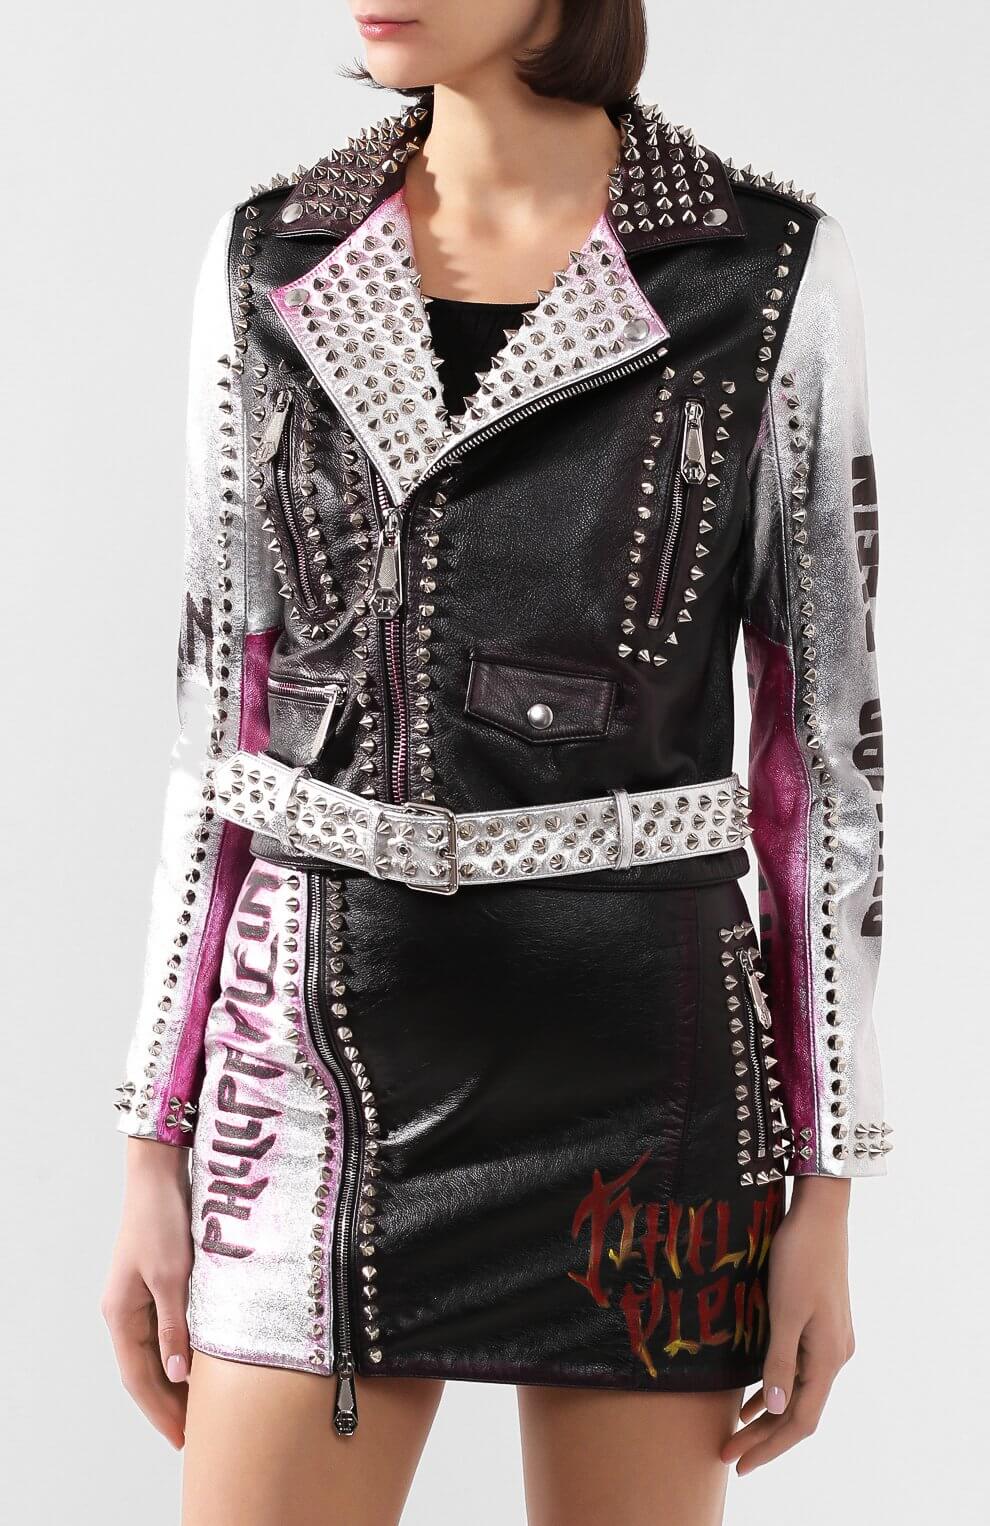 Philipp Plein Studded Quilted Bomber Jacket